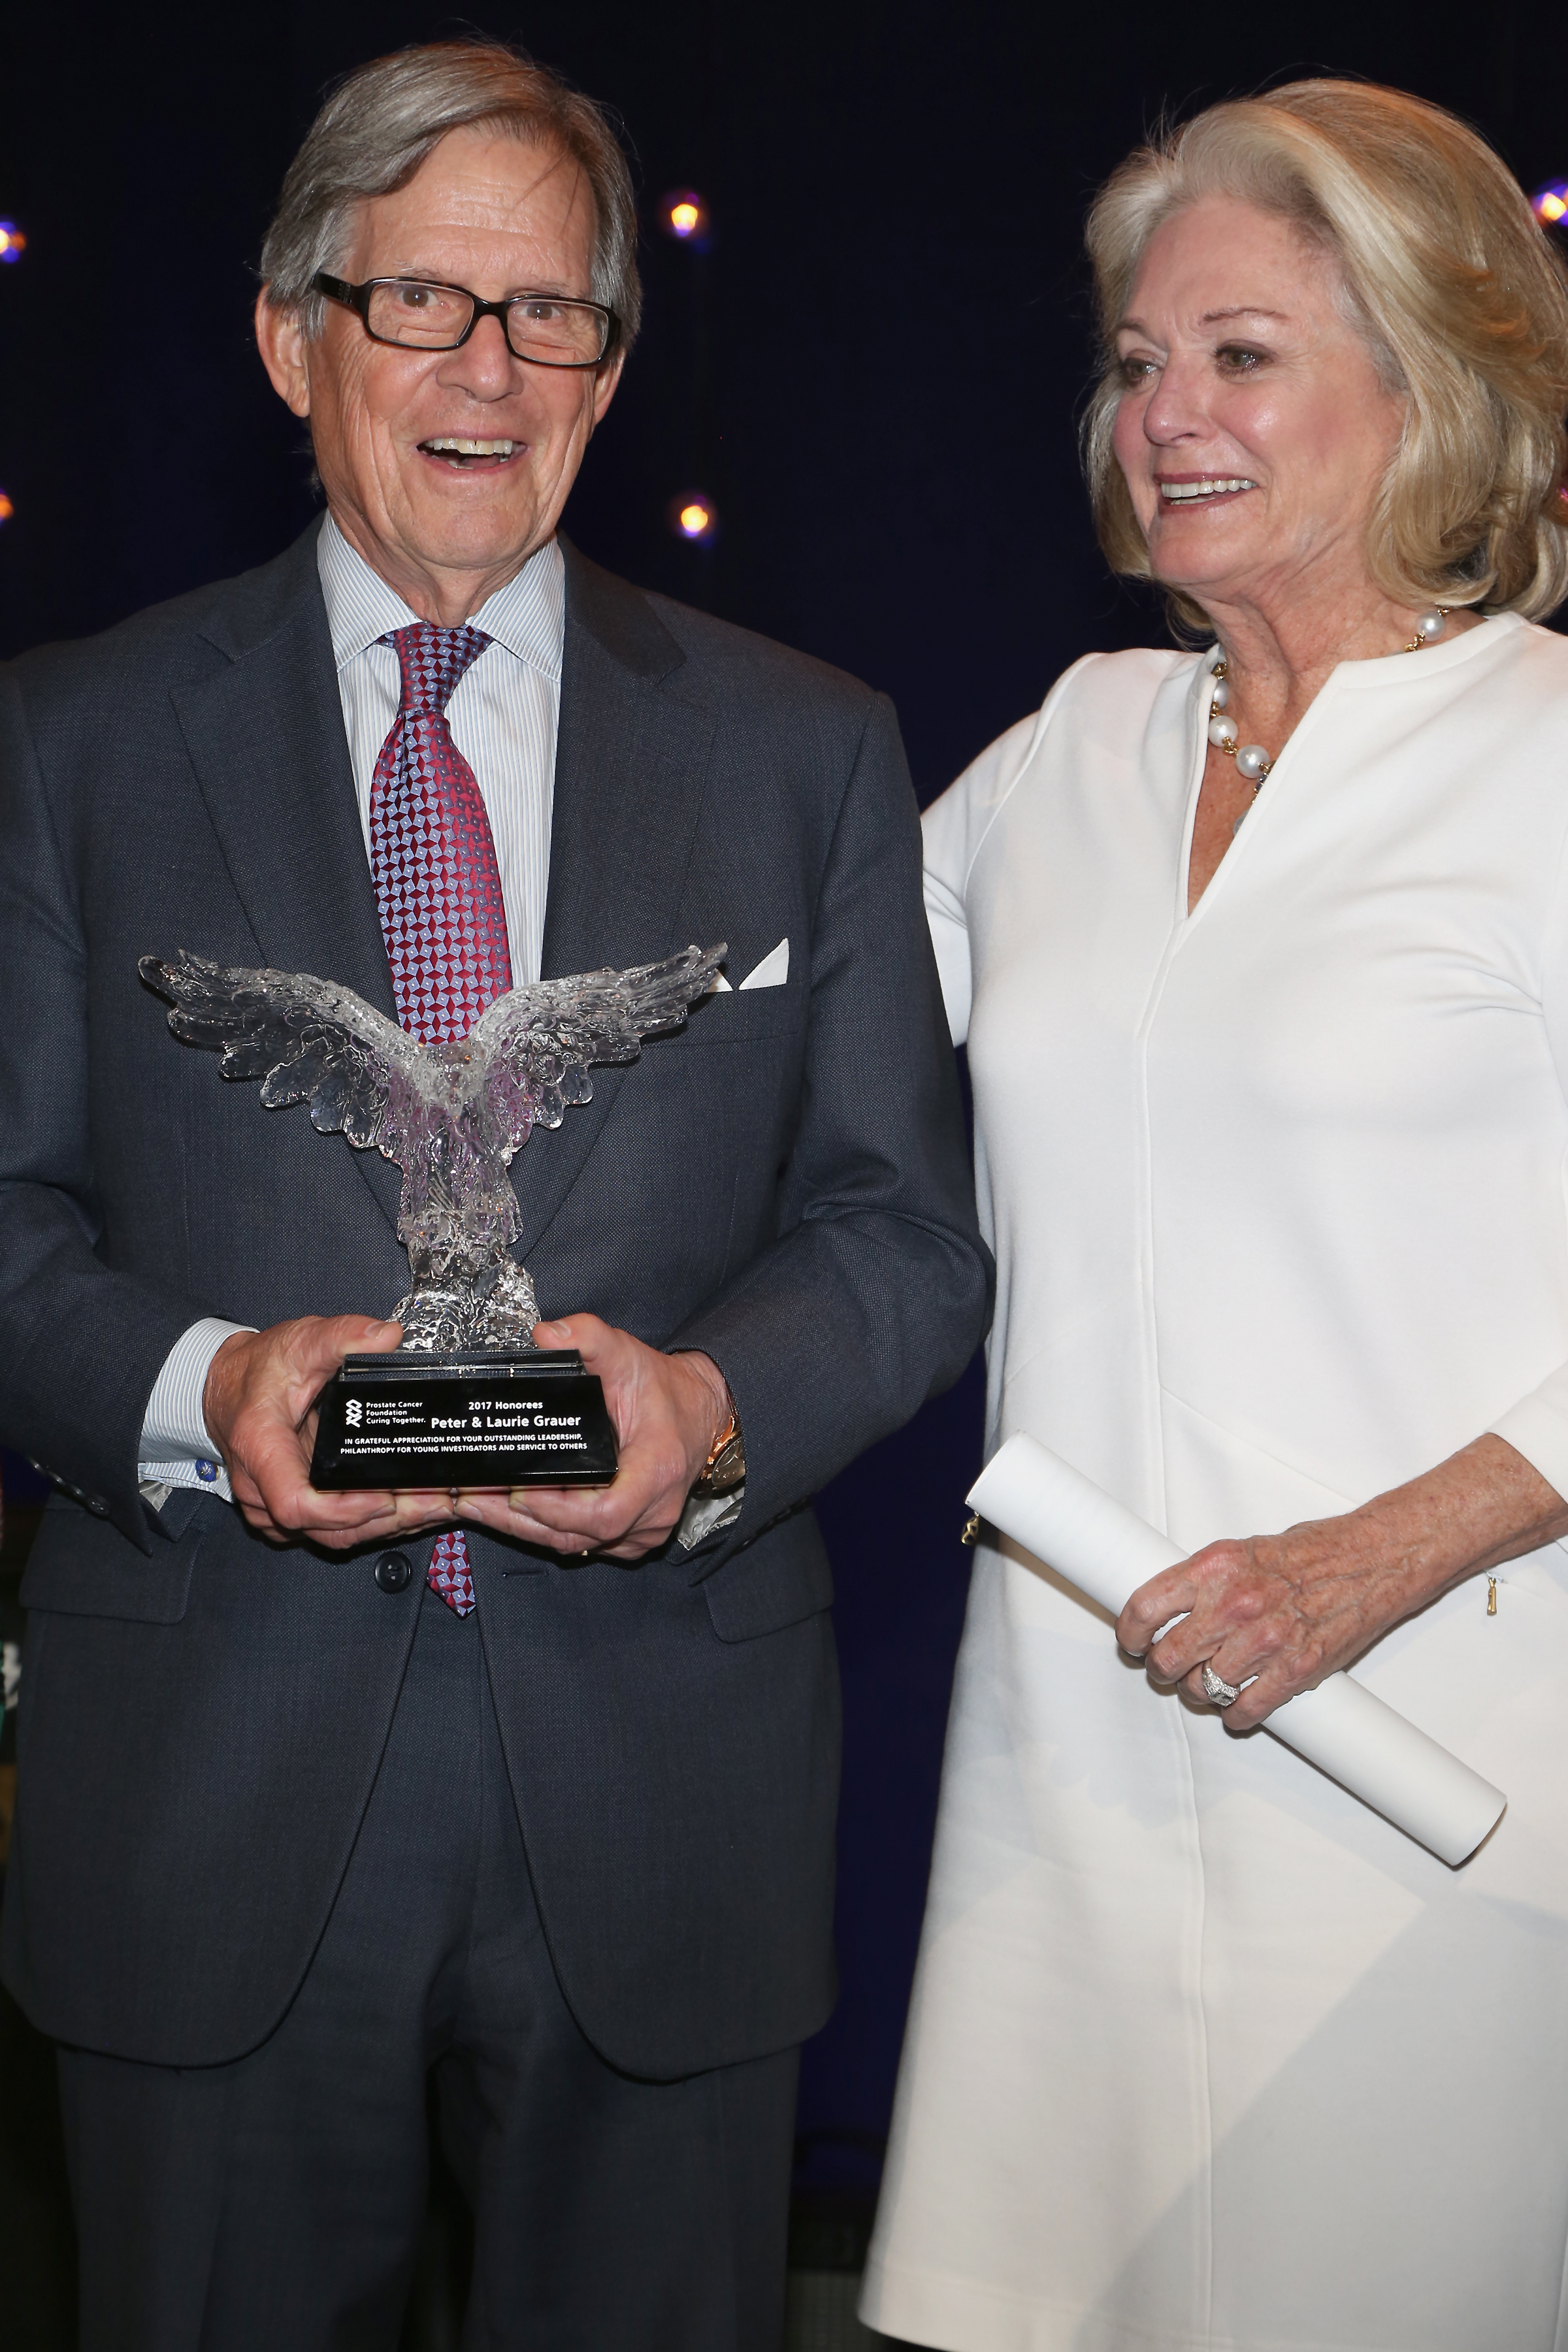 Peter Grauer, Laurie Grauer==
Prostate Cancer Foundation Presents the 2017 New York Dinner==
Cipriani 42nd Street, NYC==
November 6, 2017==
©Patrick McMullan==
Photo - Sylvain Gaboury/PMC==
==